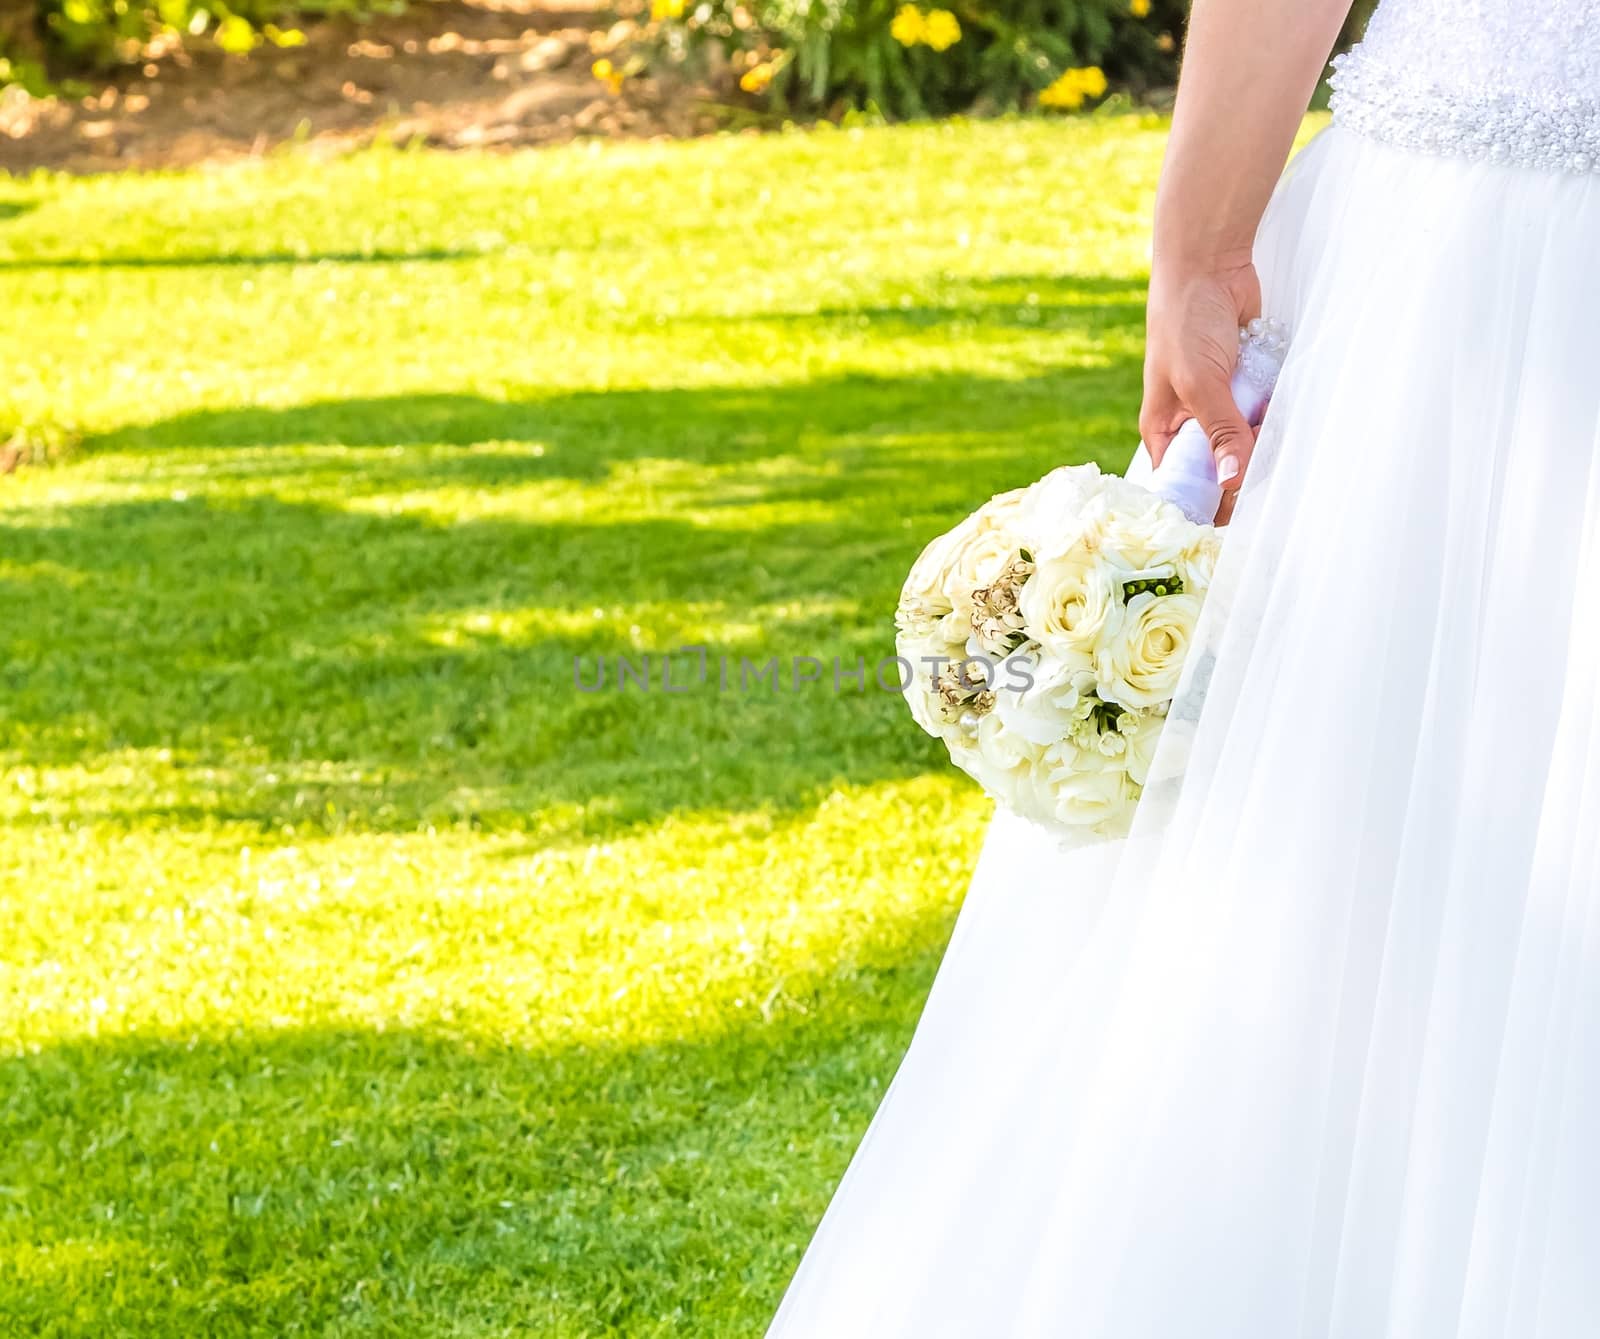 detail of wedding bouquet of flowers in hand of a bride in a green garden with space for text